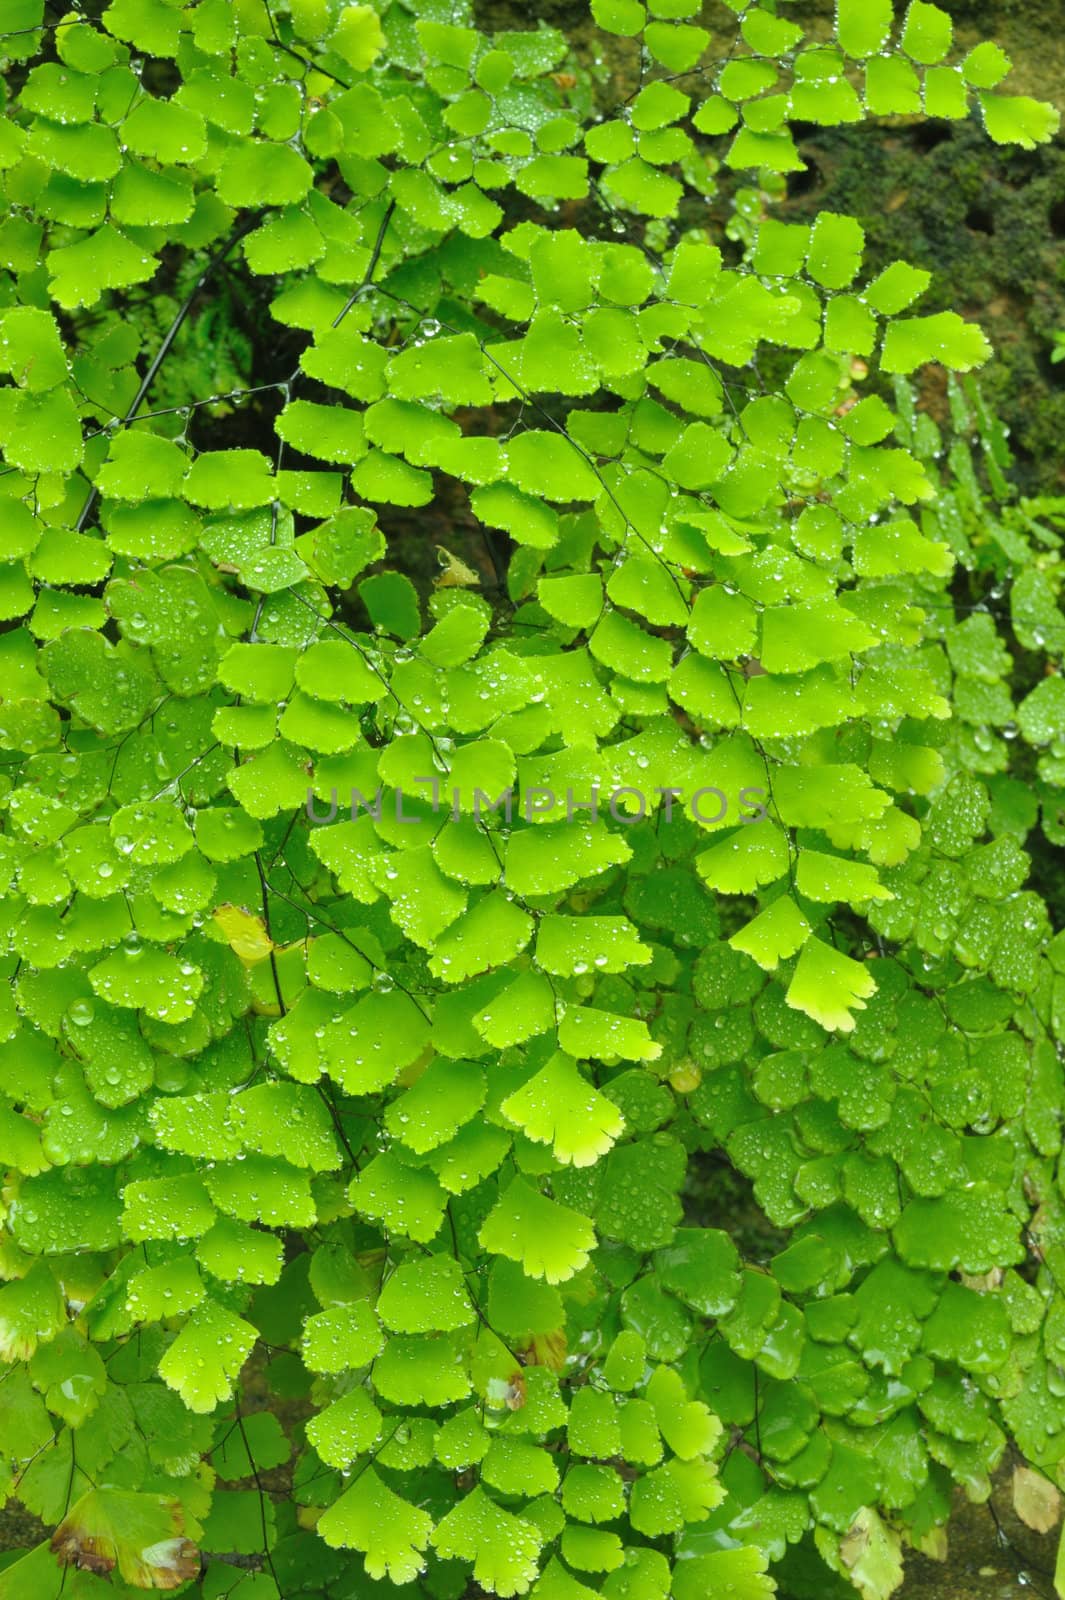 Background image with details of green fern in rain forast, Thailand.